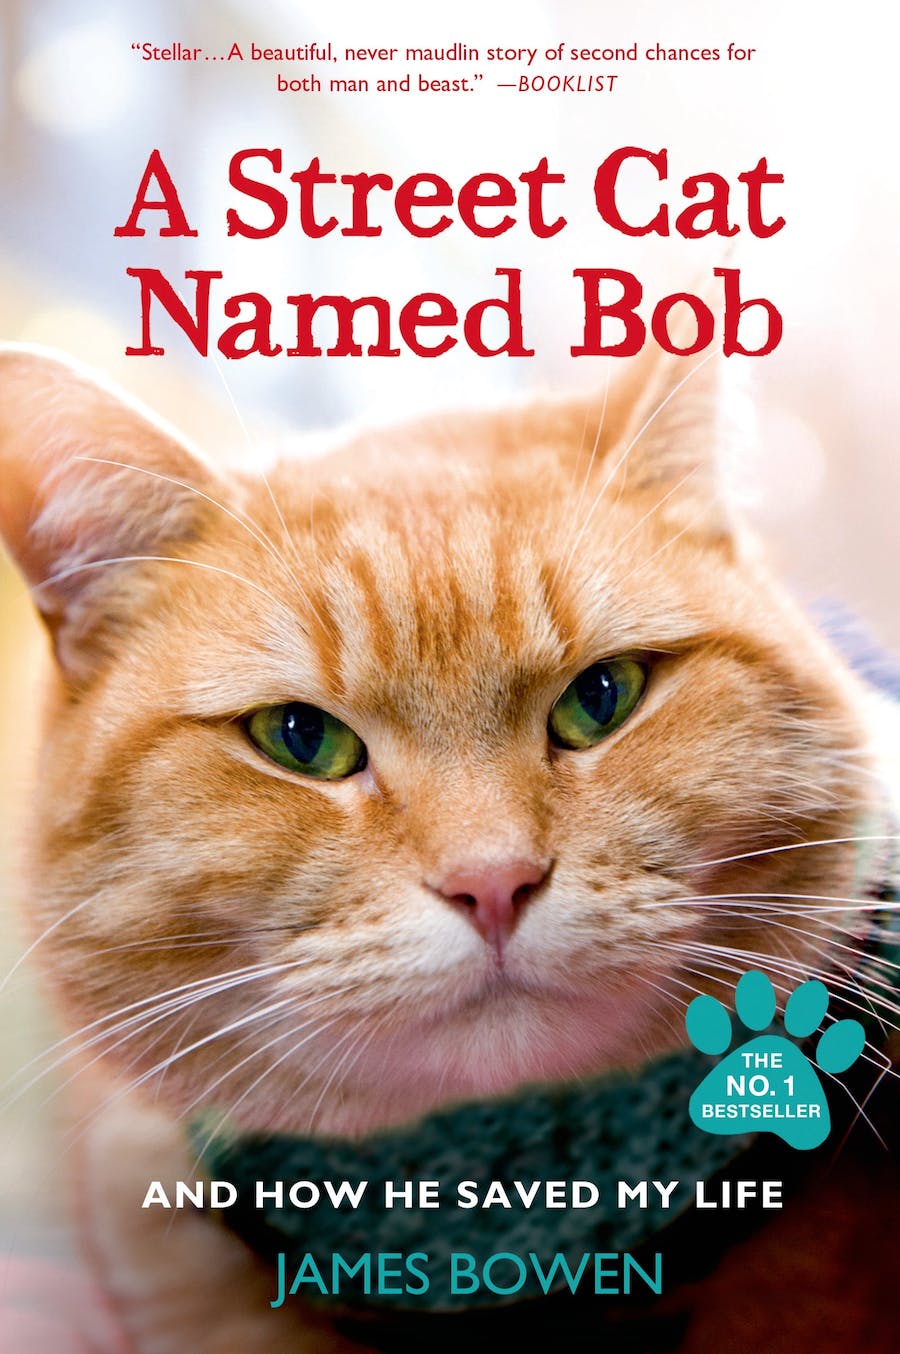 Cover of "A Street Cat Named Bob" by James Bowen